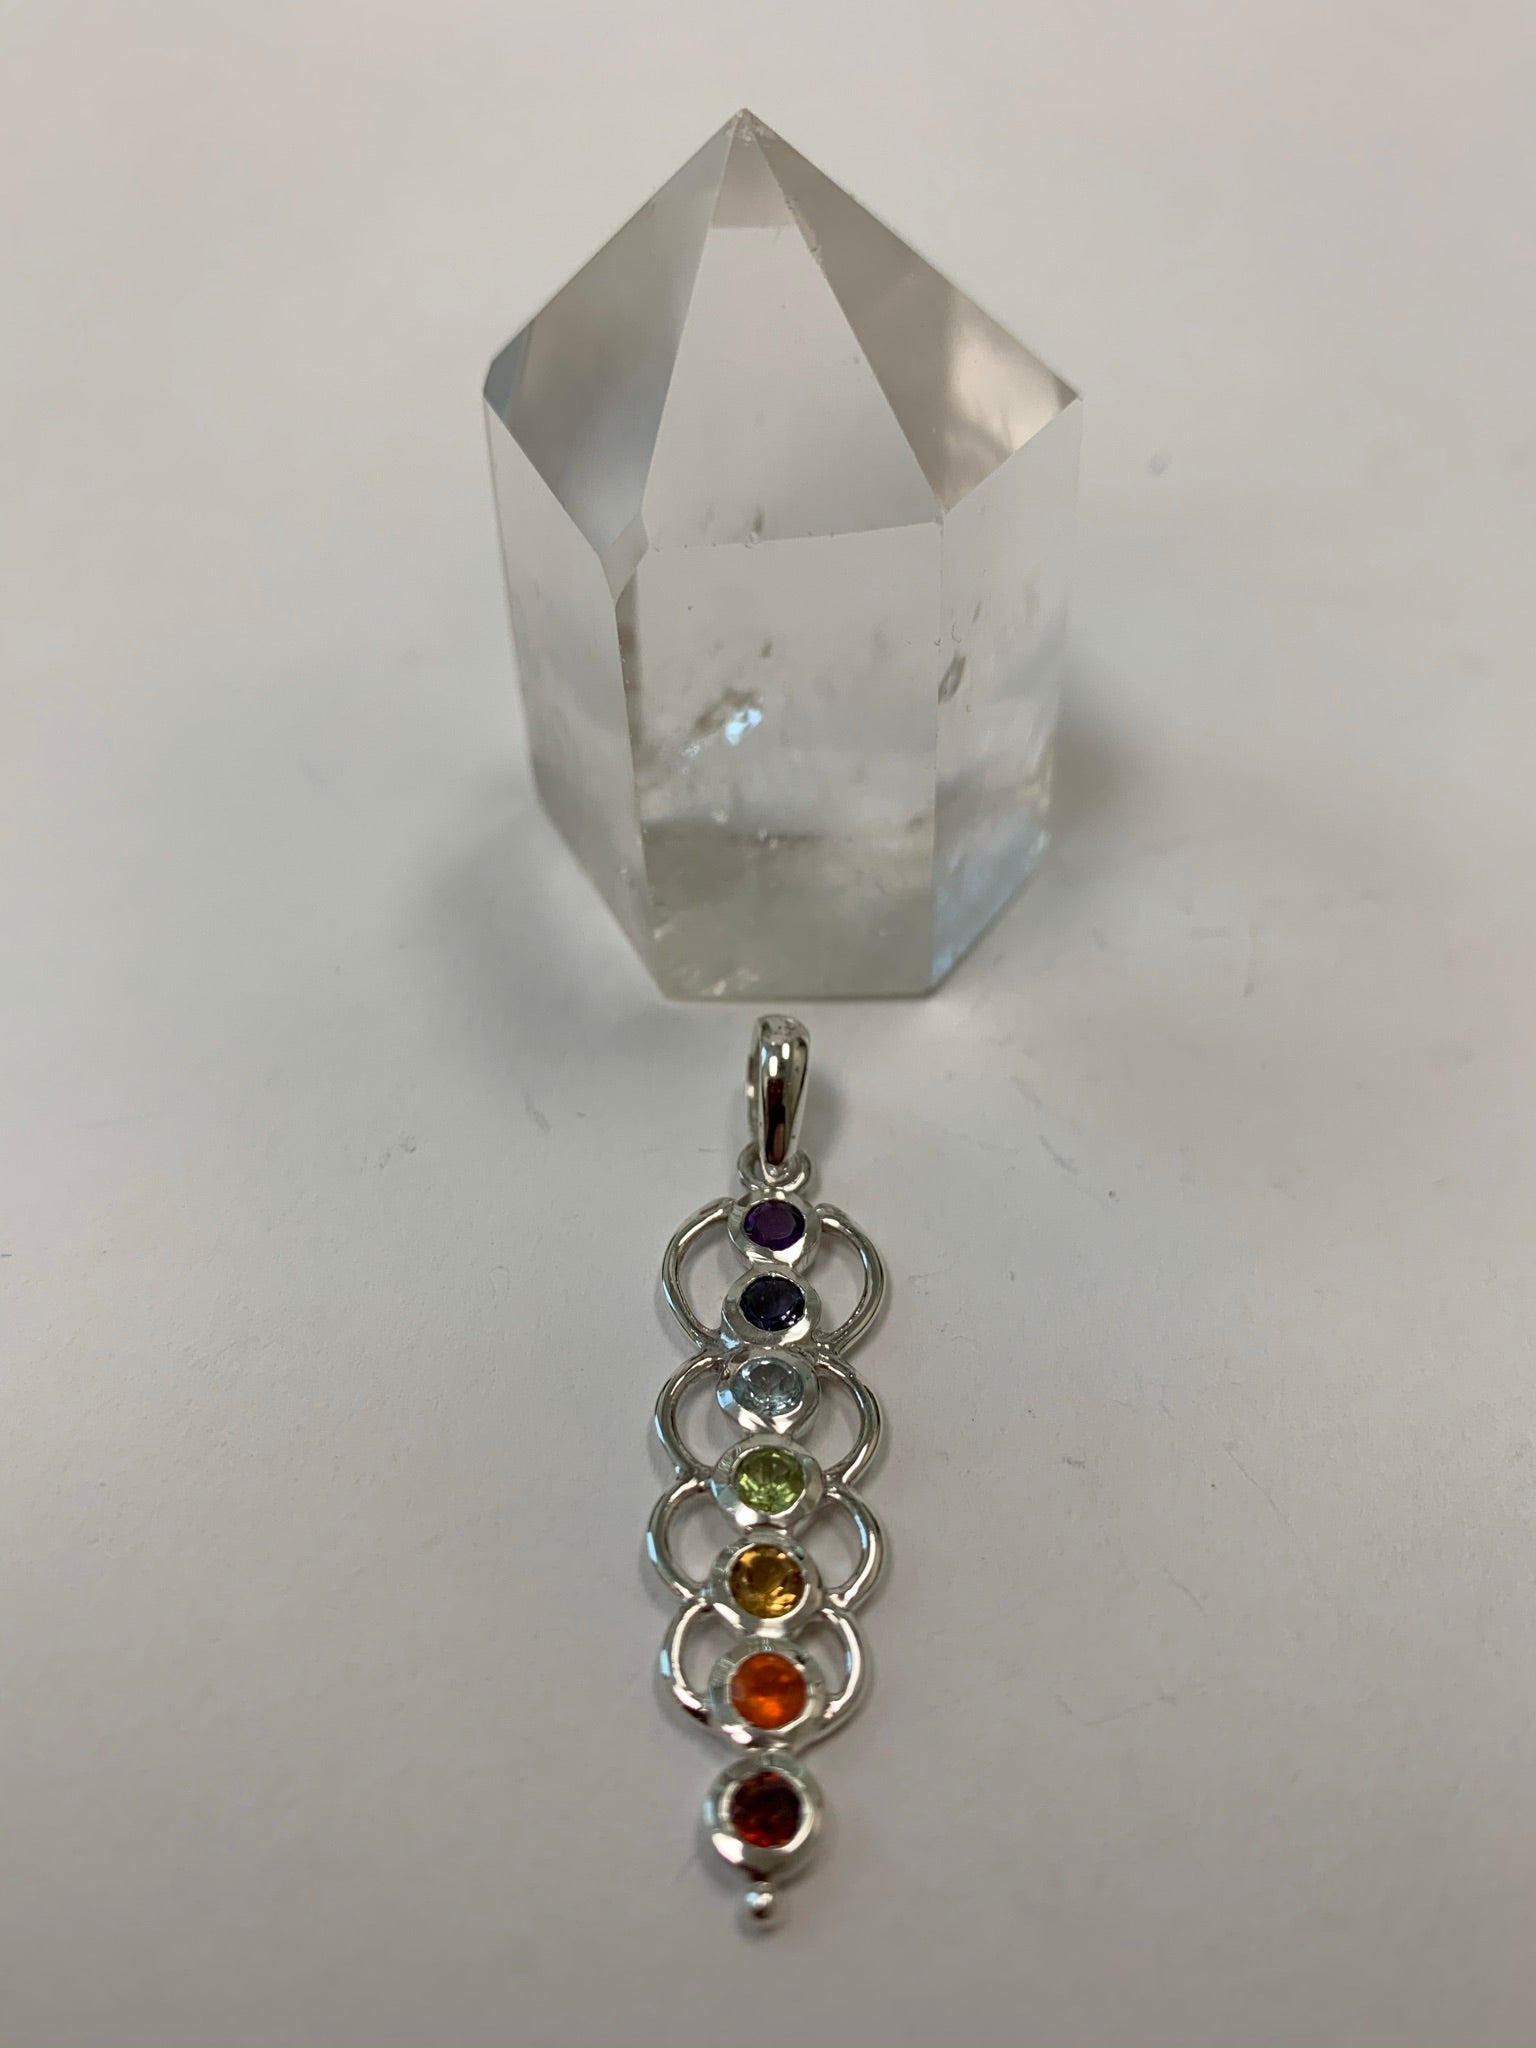 Another view of Chakra energy link pendant. Small faceted stones that represent each of the chakras: amethyst/crown, iolite/third eye, blue topaz/throat, peridot/heart, citrine/solar plexus, carnelian/sacral (or naval), garnet/root (or base). These stones, set in links or loops of sterling silver, two per loop or link, go straight down the middle. Pendant is approximately 1¾".